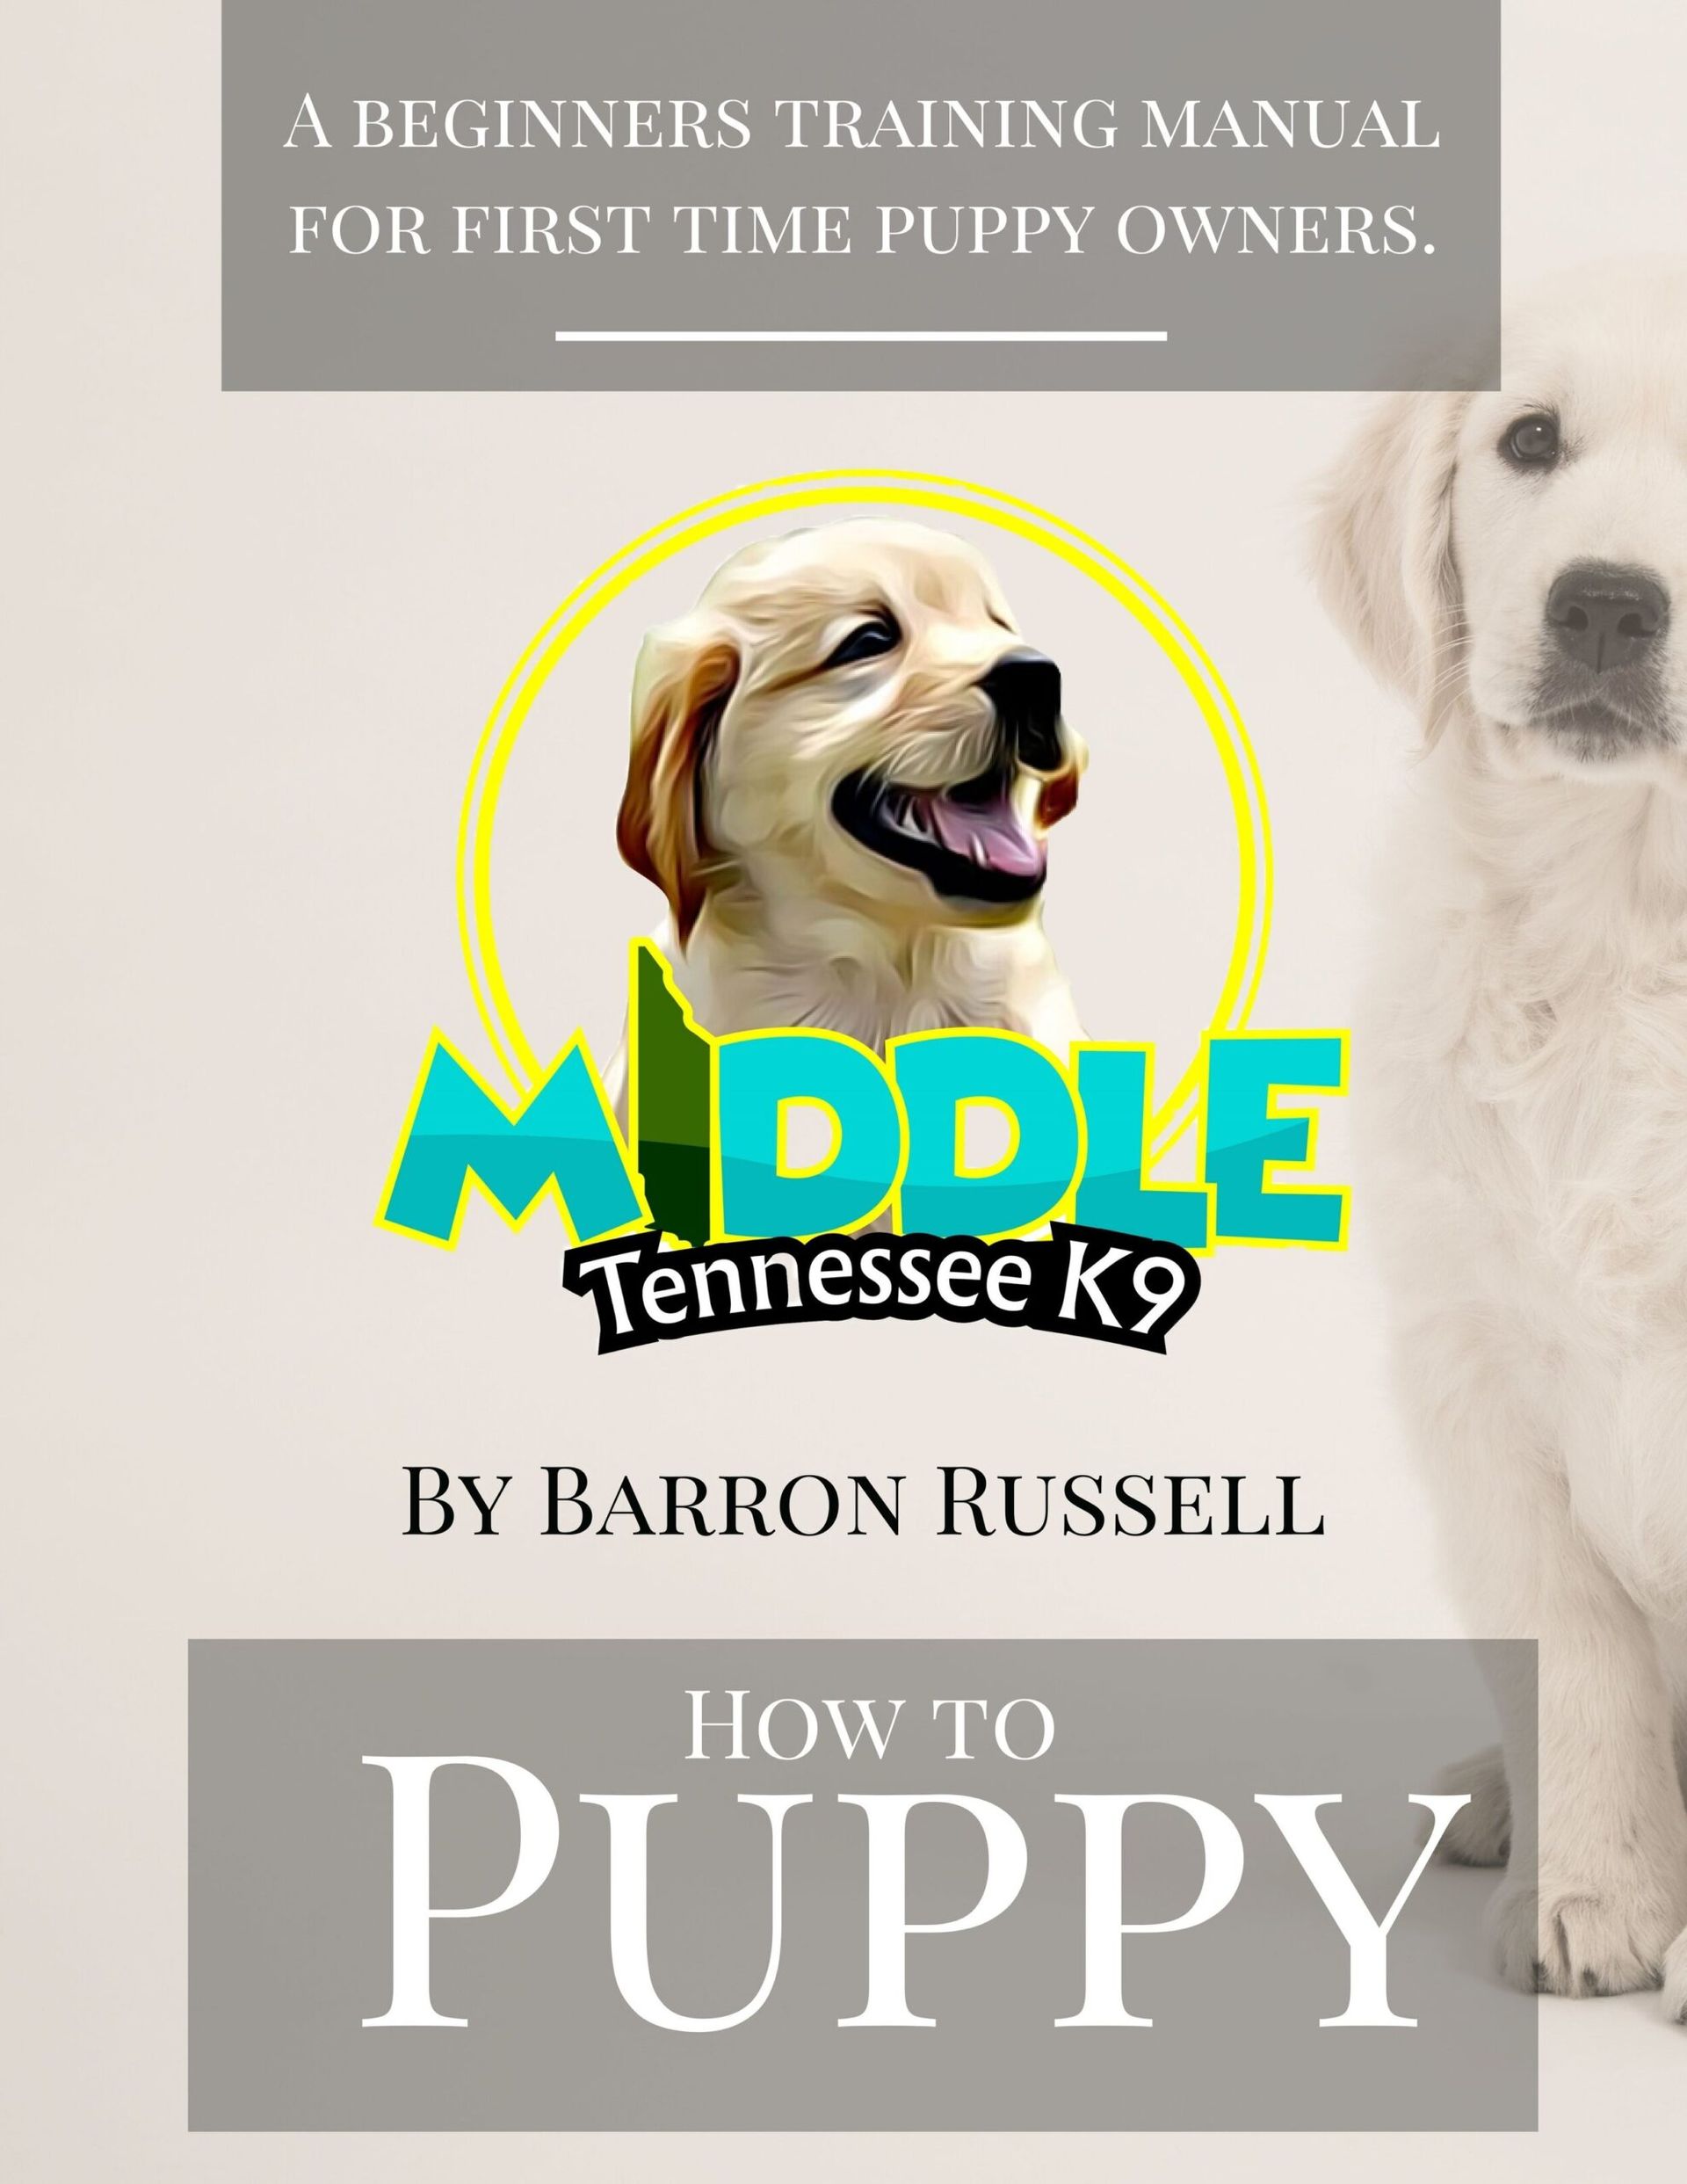 How to Puppy E-book Cover — Nashville, TN — Middle Tennessee K9